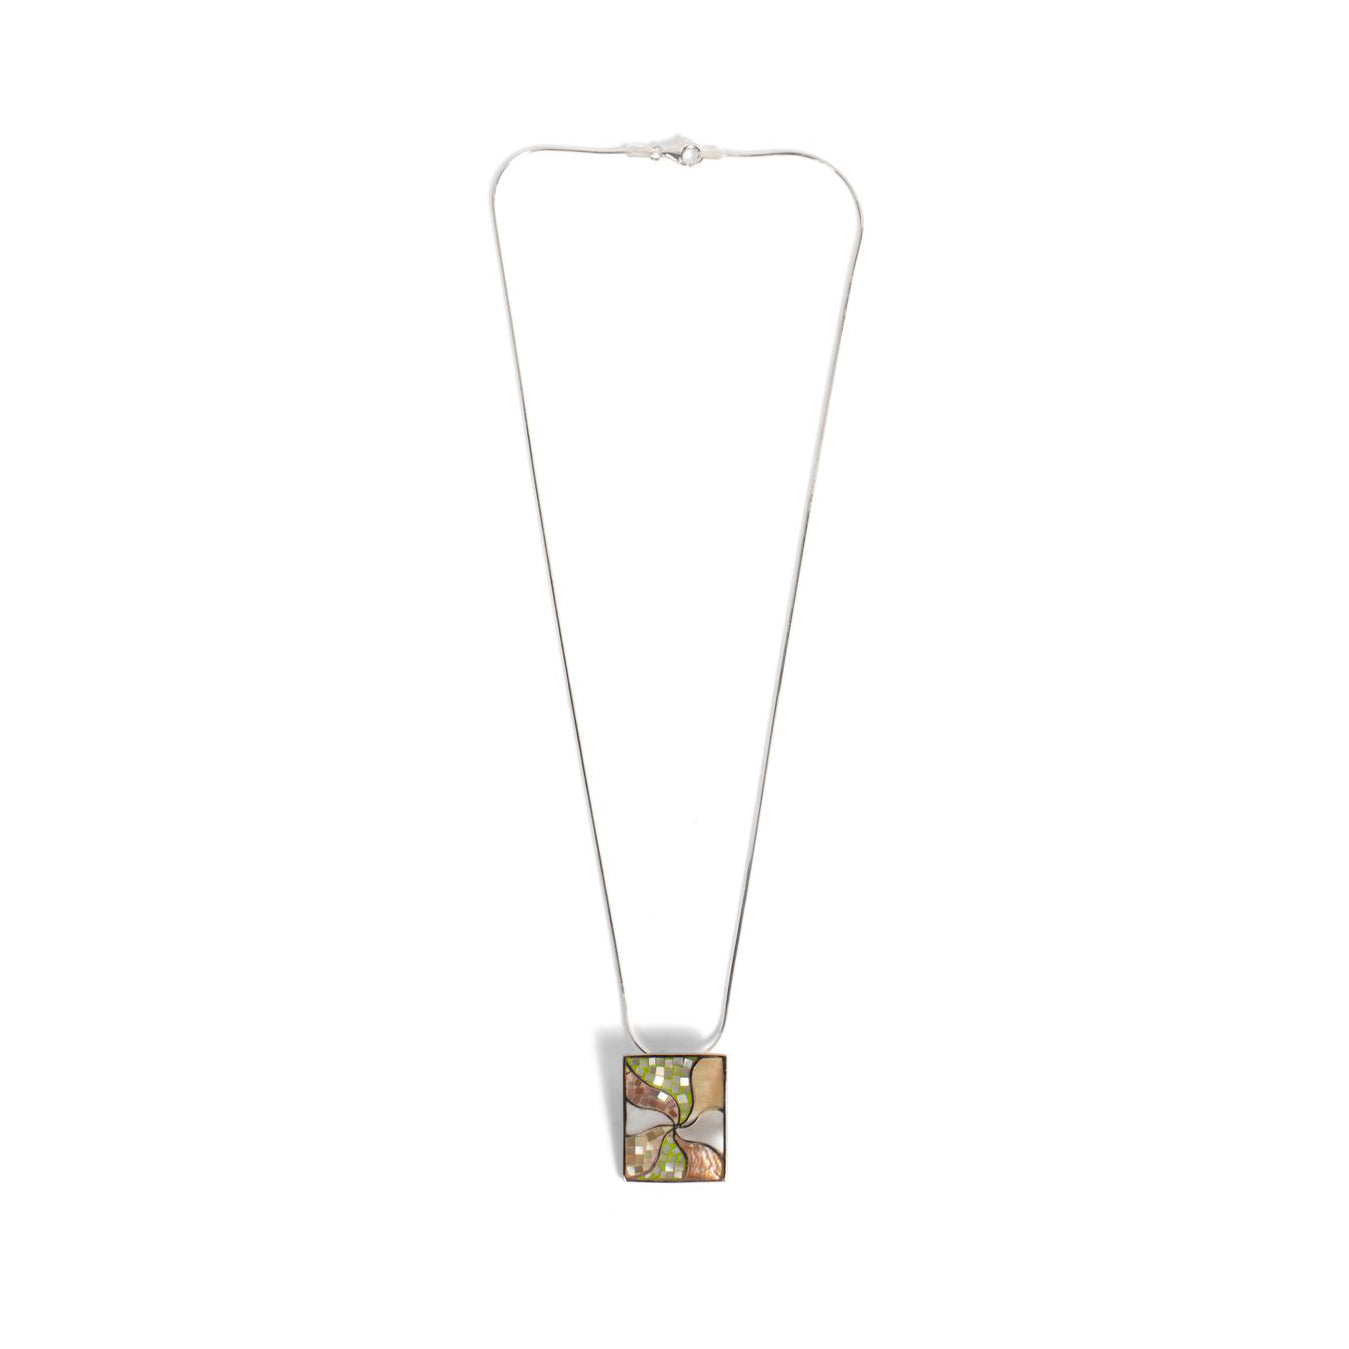 Mother of Pearl Color Blossom Diamond Necklace Gold/White/Square